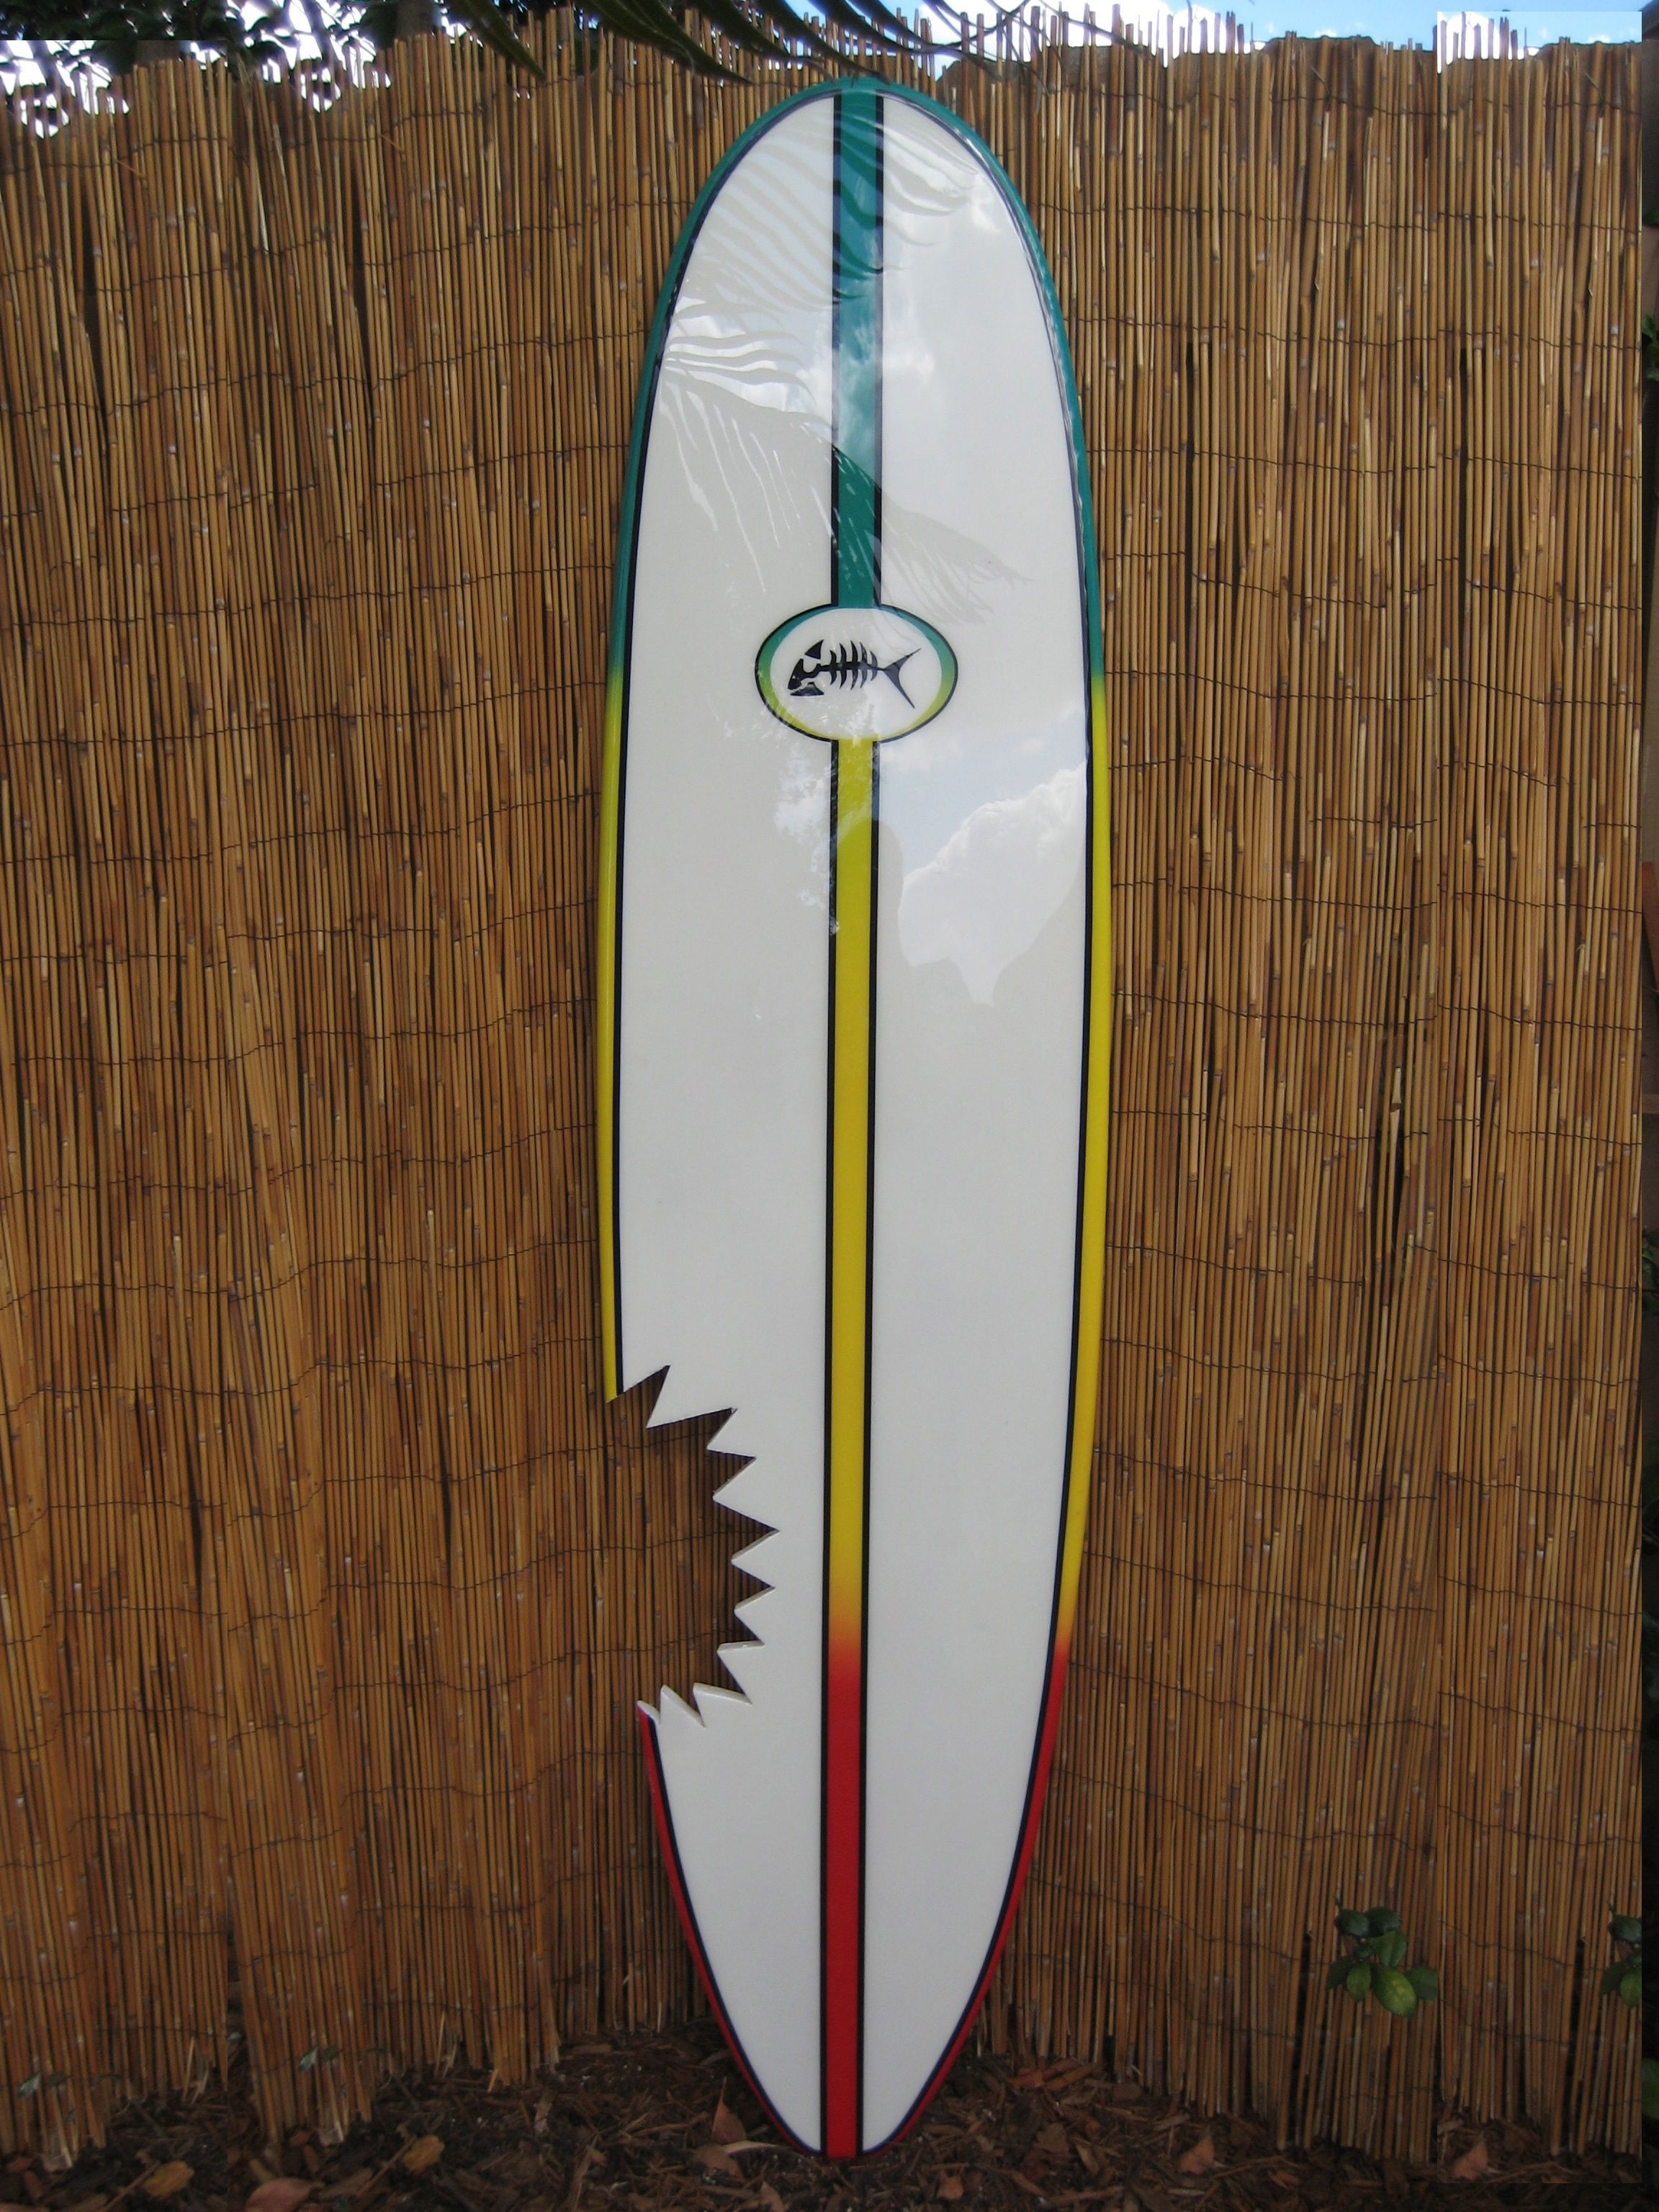 Most Recently Released Surfboard Wall Art Within Decorative Wood Surfboard Art Wall Surf Surfboard Decor (View 14 of 20)